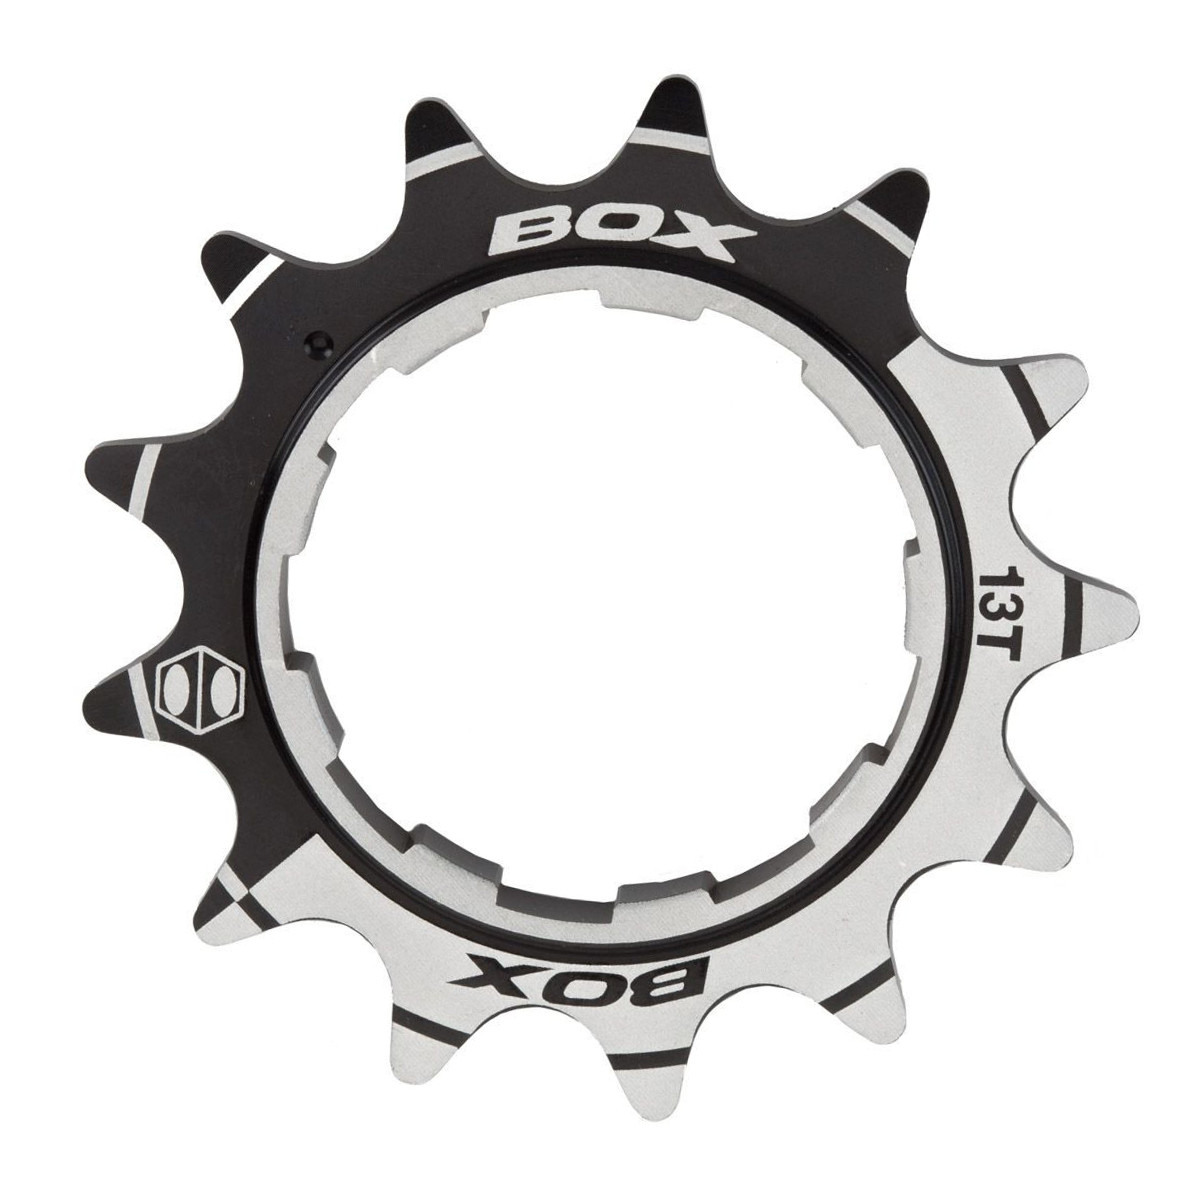 BoxComponents - Box One Single Speed Cogs